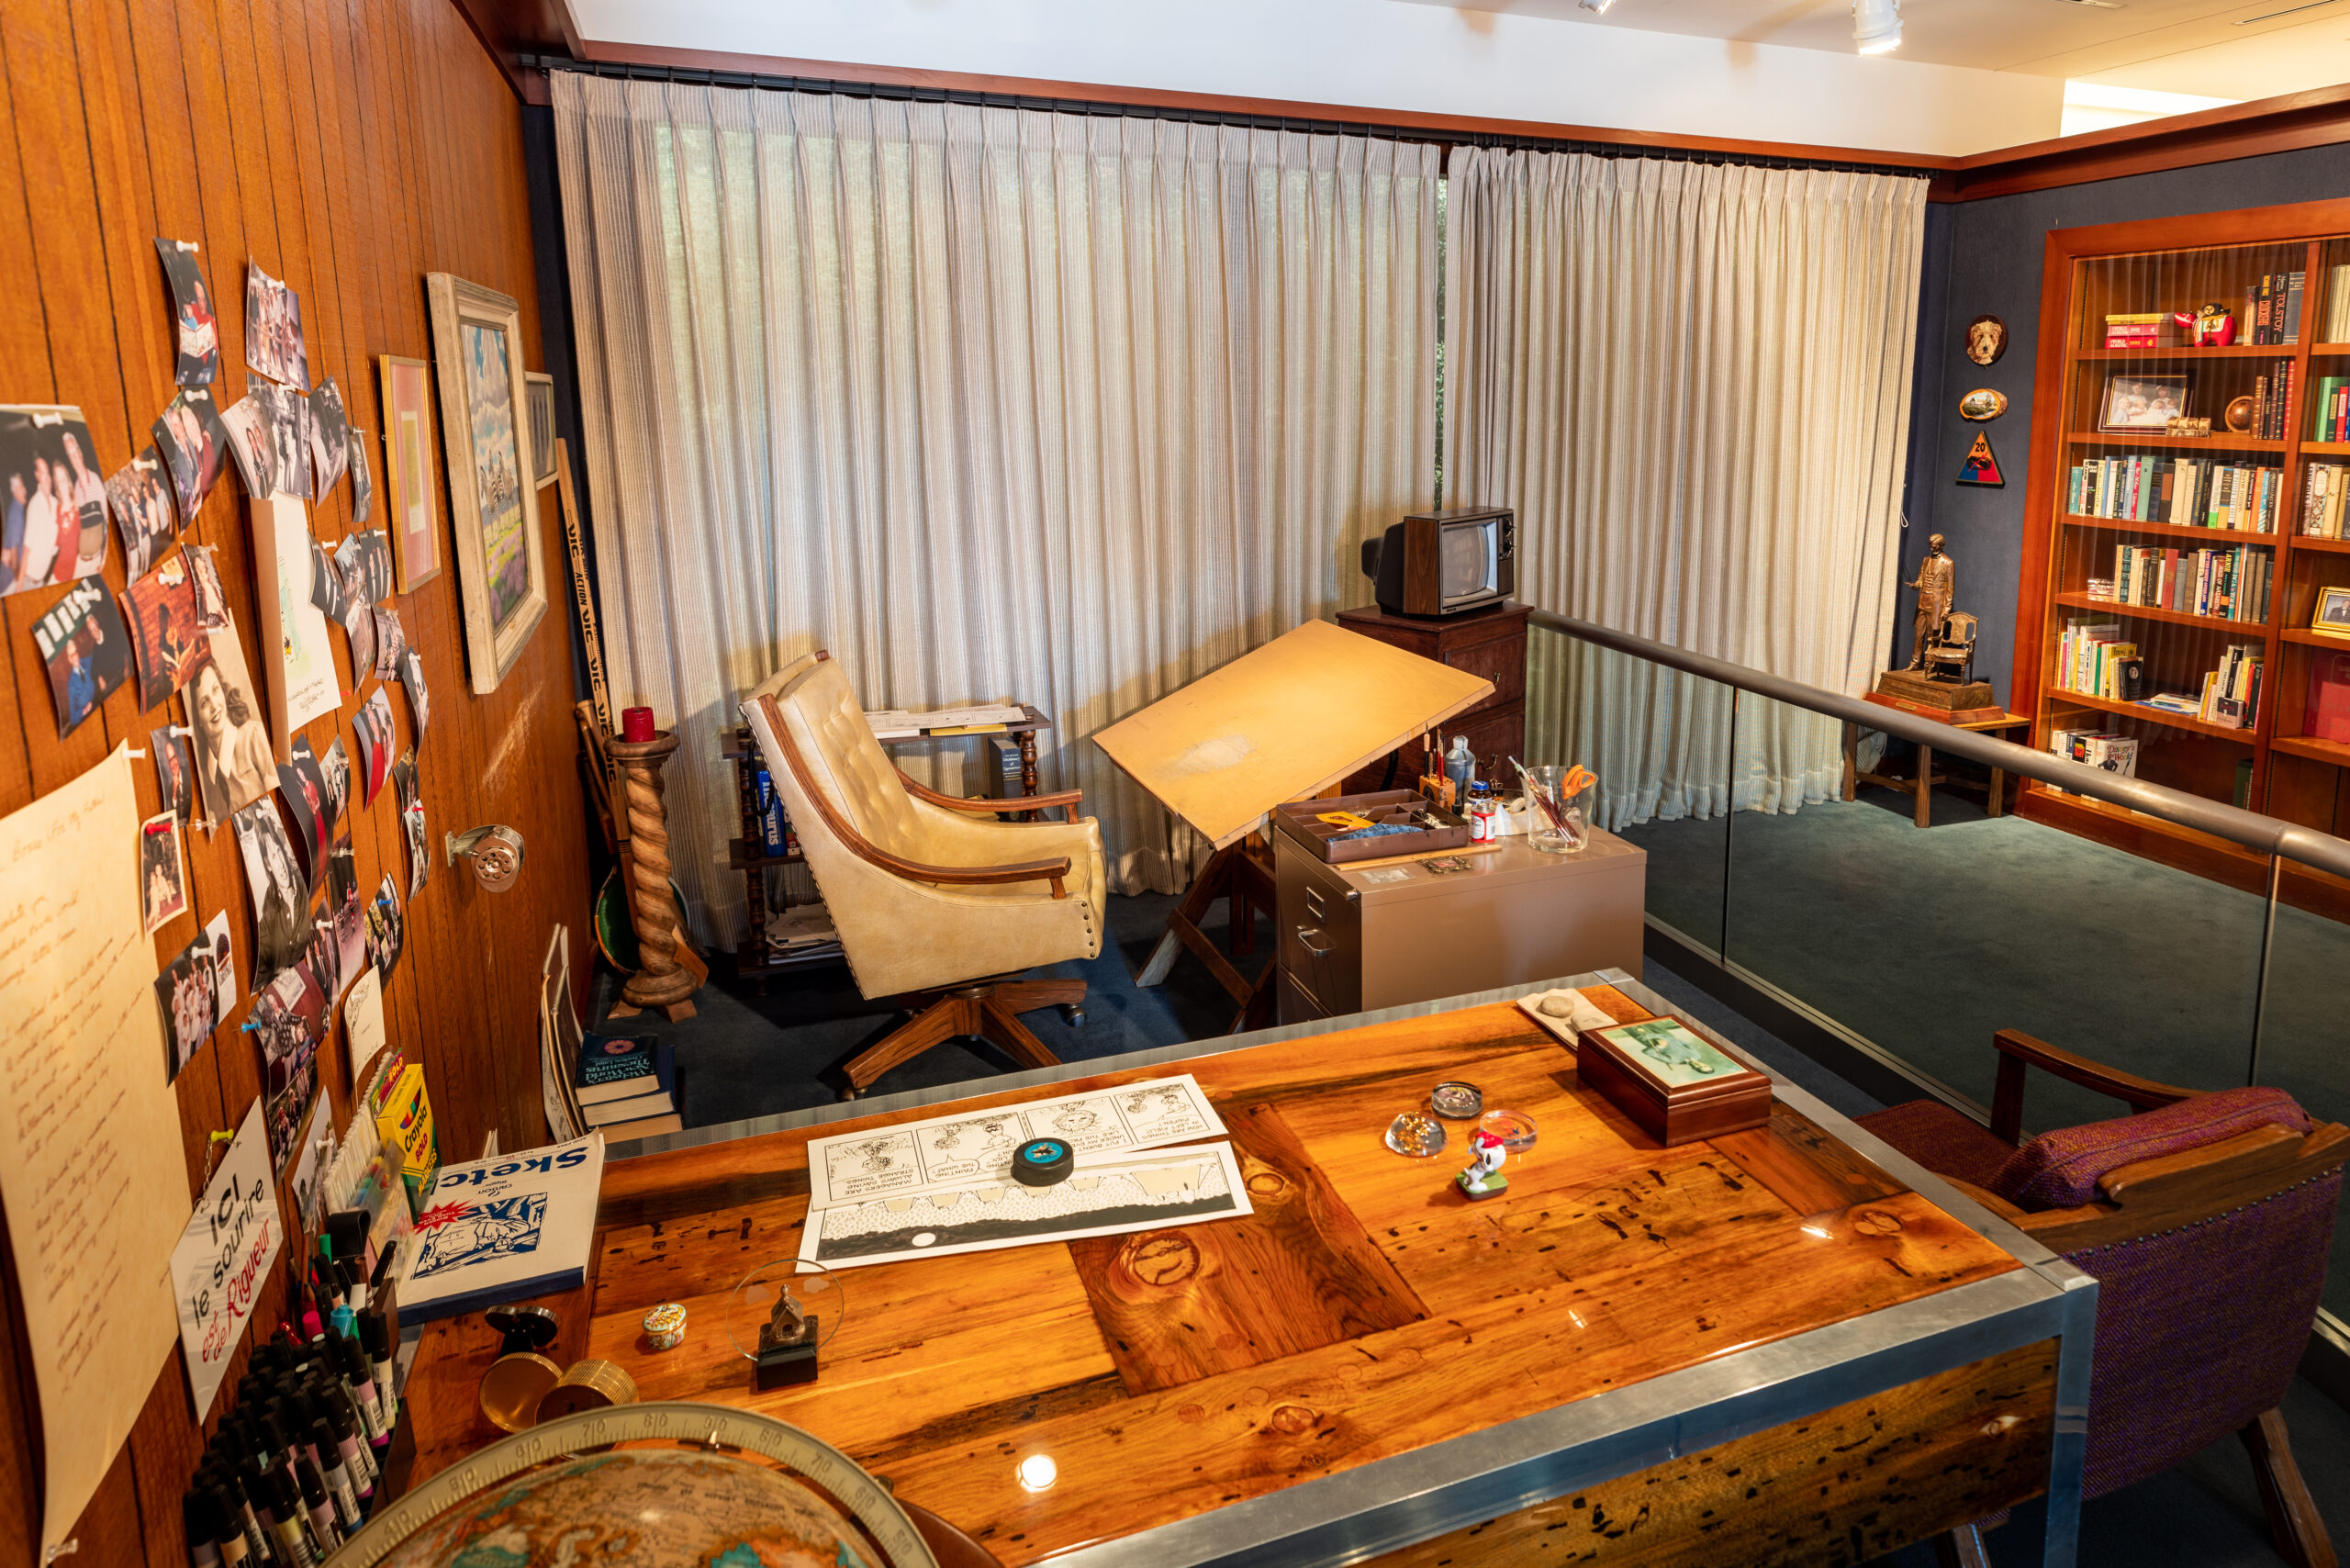 The cartoonist’s studio, now a part of the Charles M. Schulz Museum in Santa Rosa. (Brennan Spark Photography)